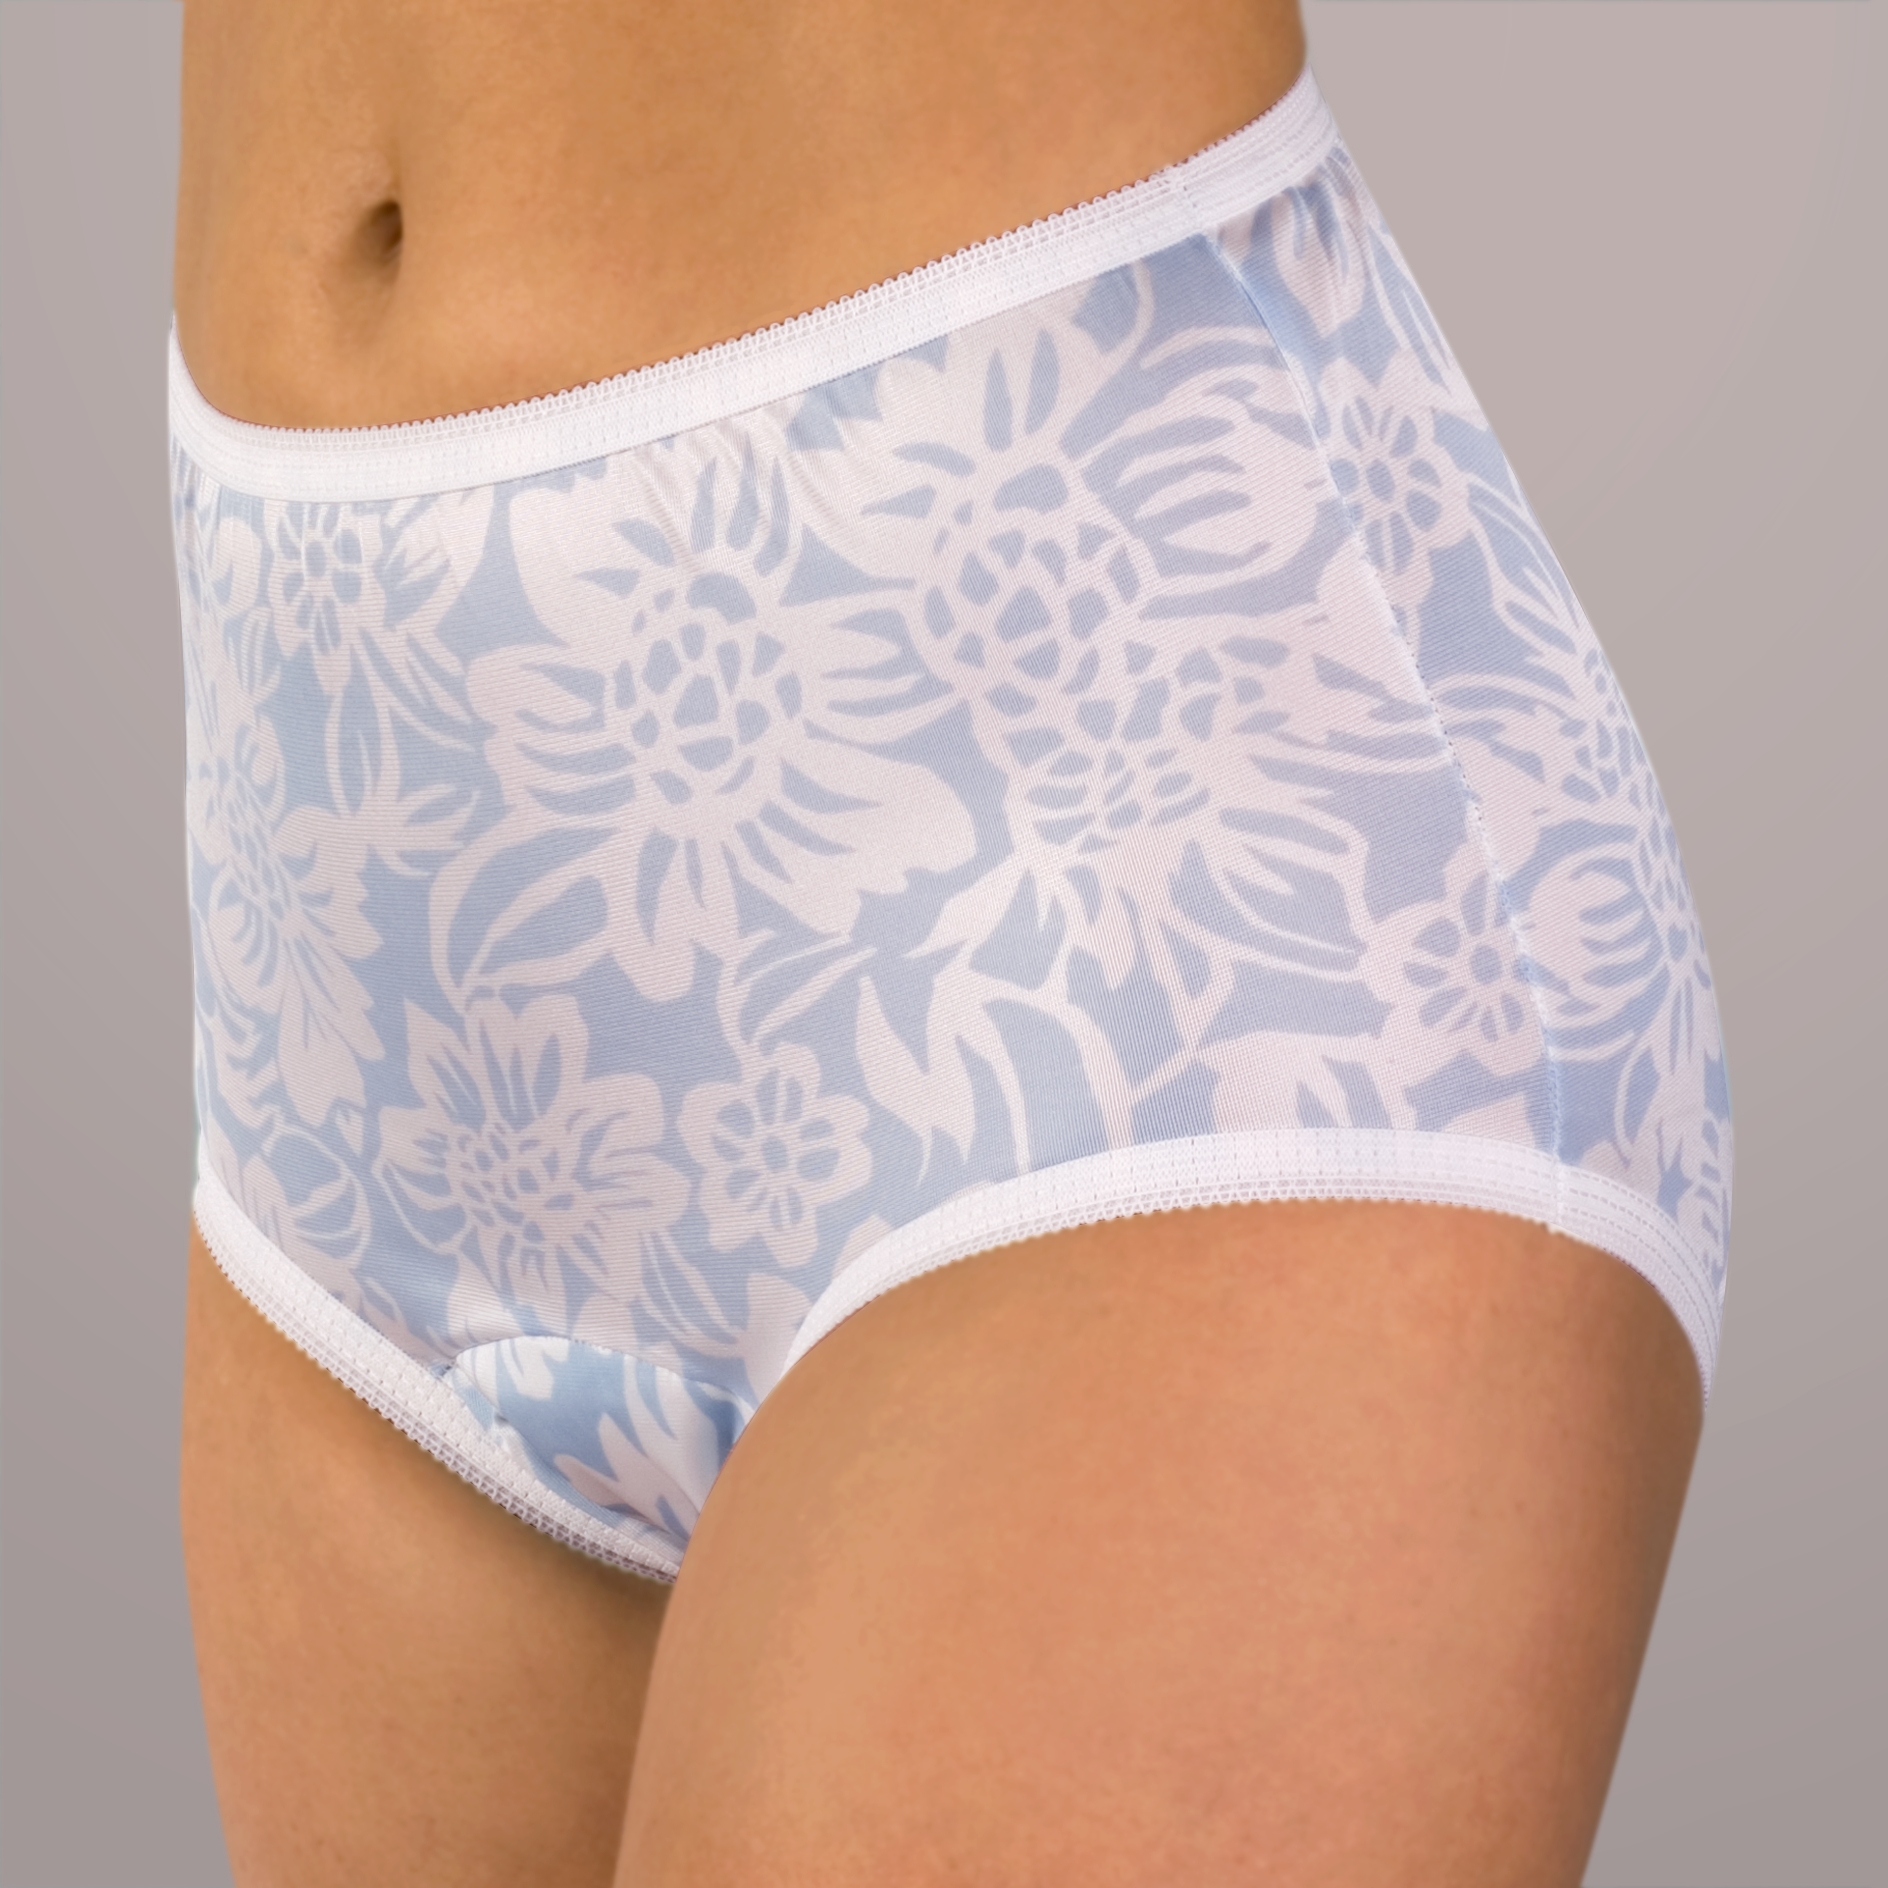 Wearever floral fancy incontinence panties from www.dryp.shop - AssistData